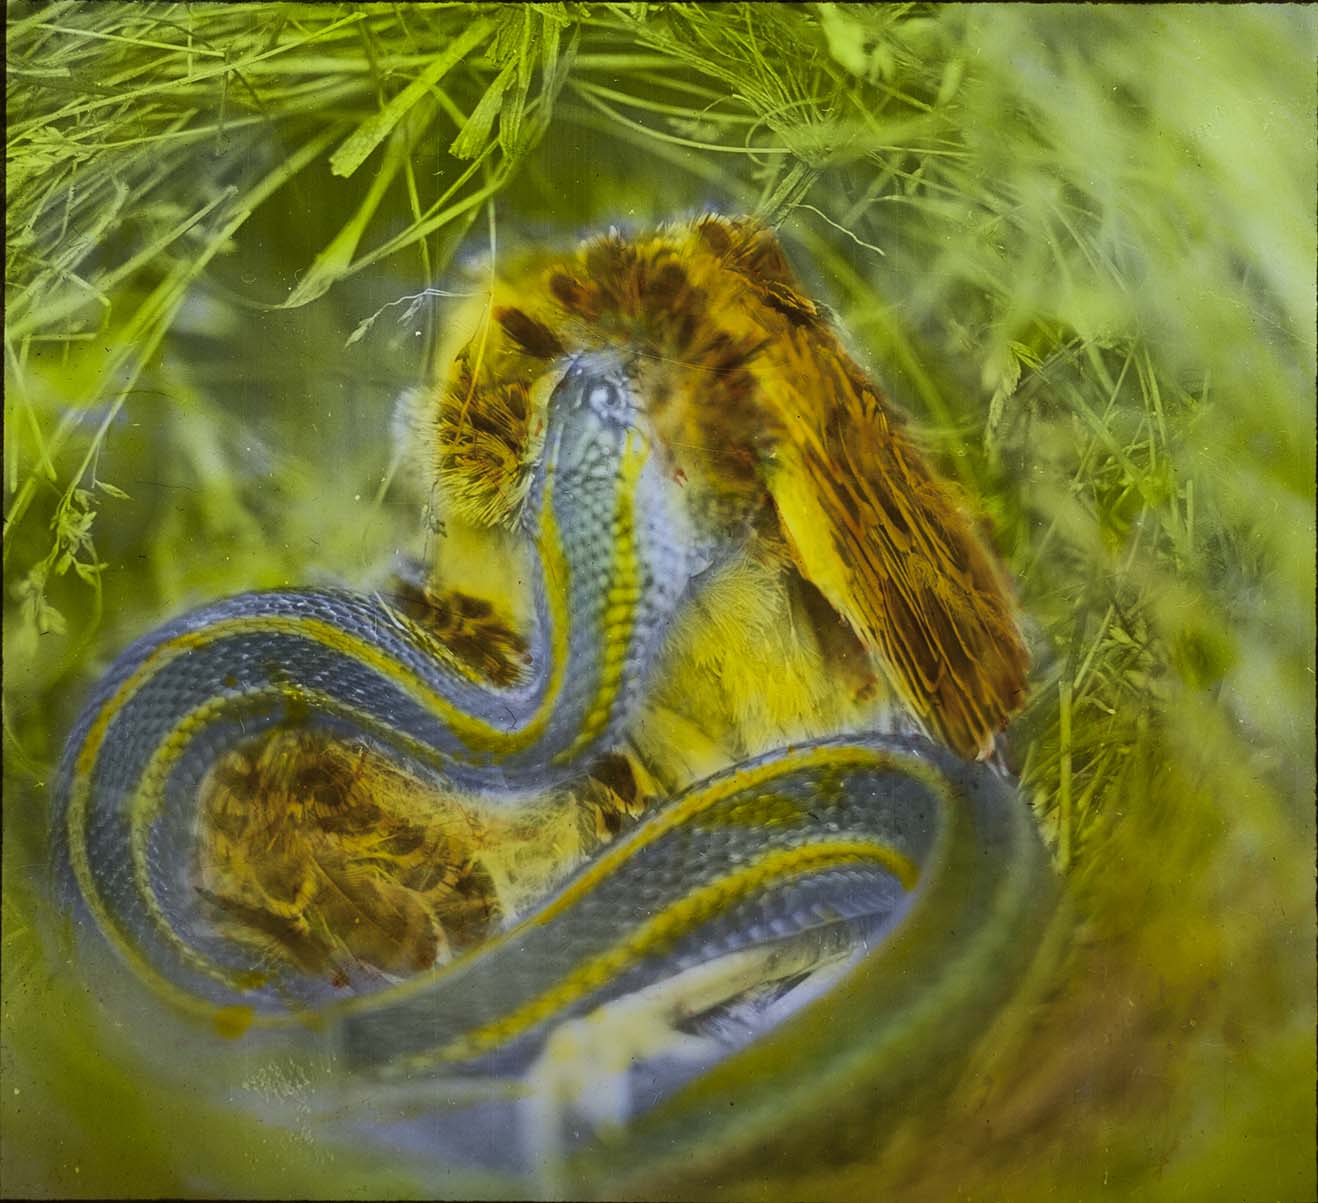 Lantern slide and photograph of a garter snake eating a young Western Meadowlark